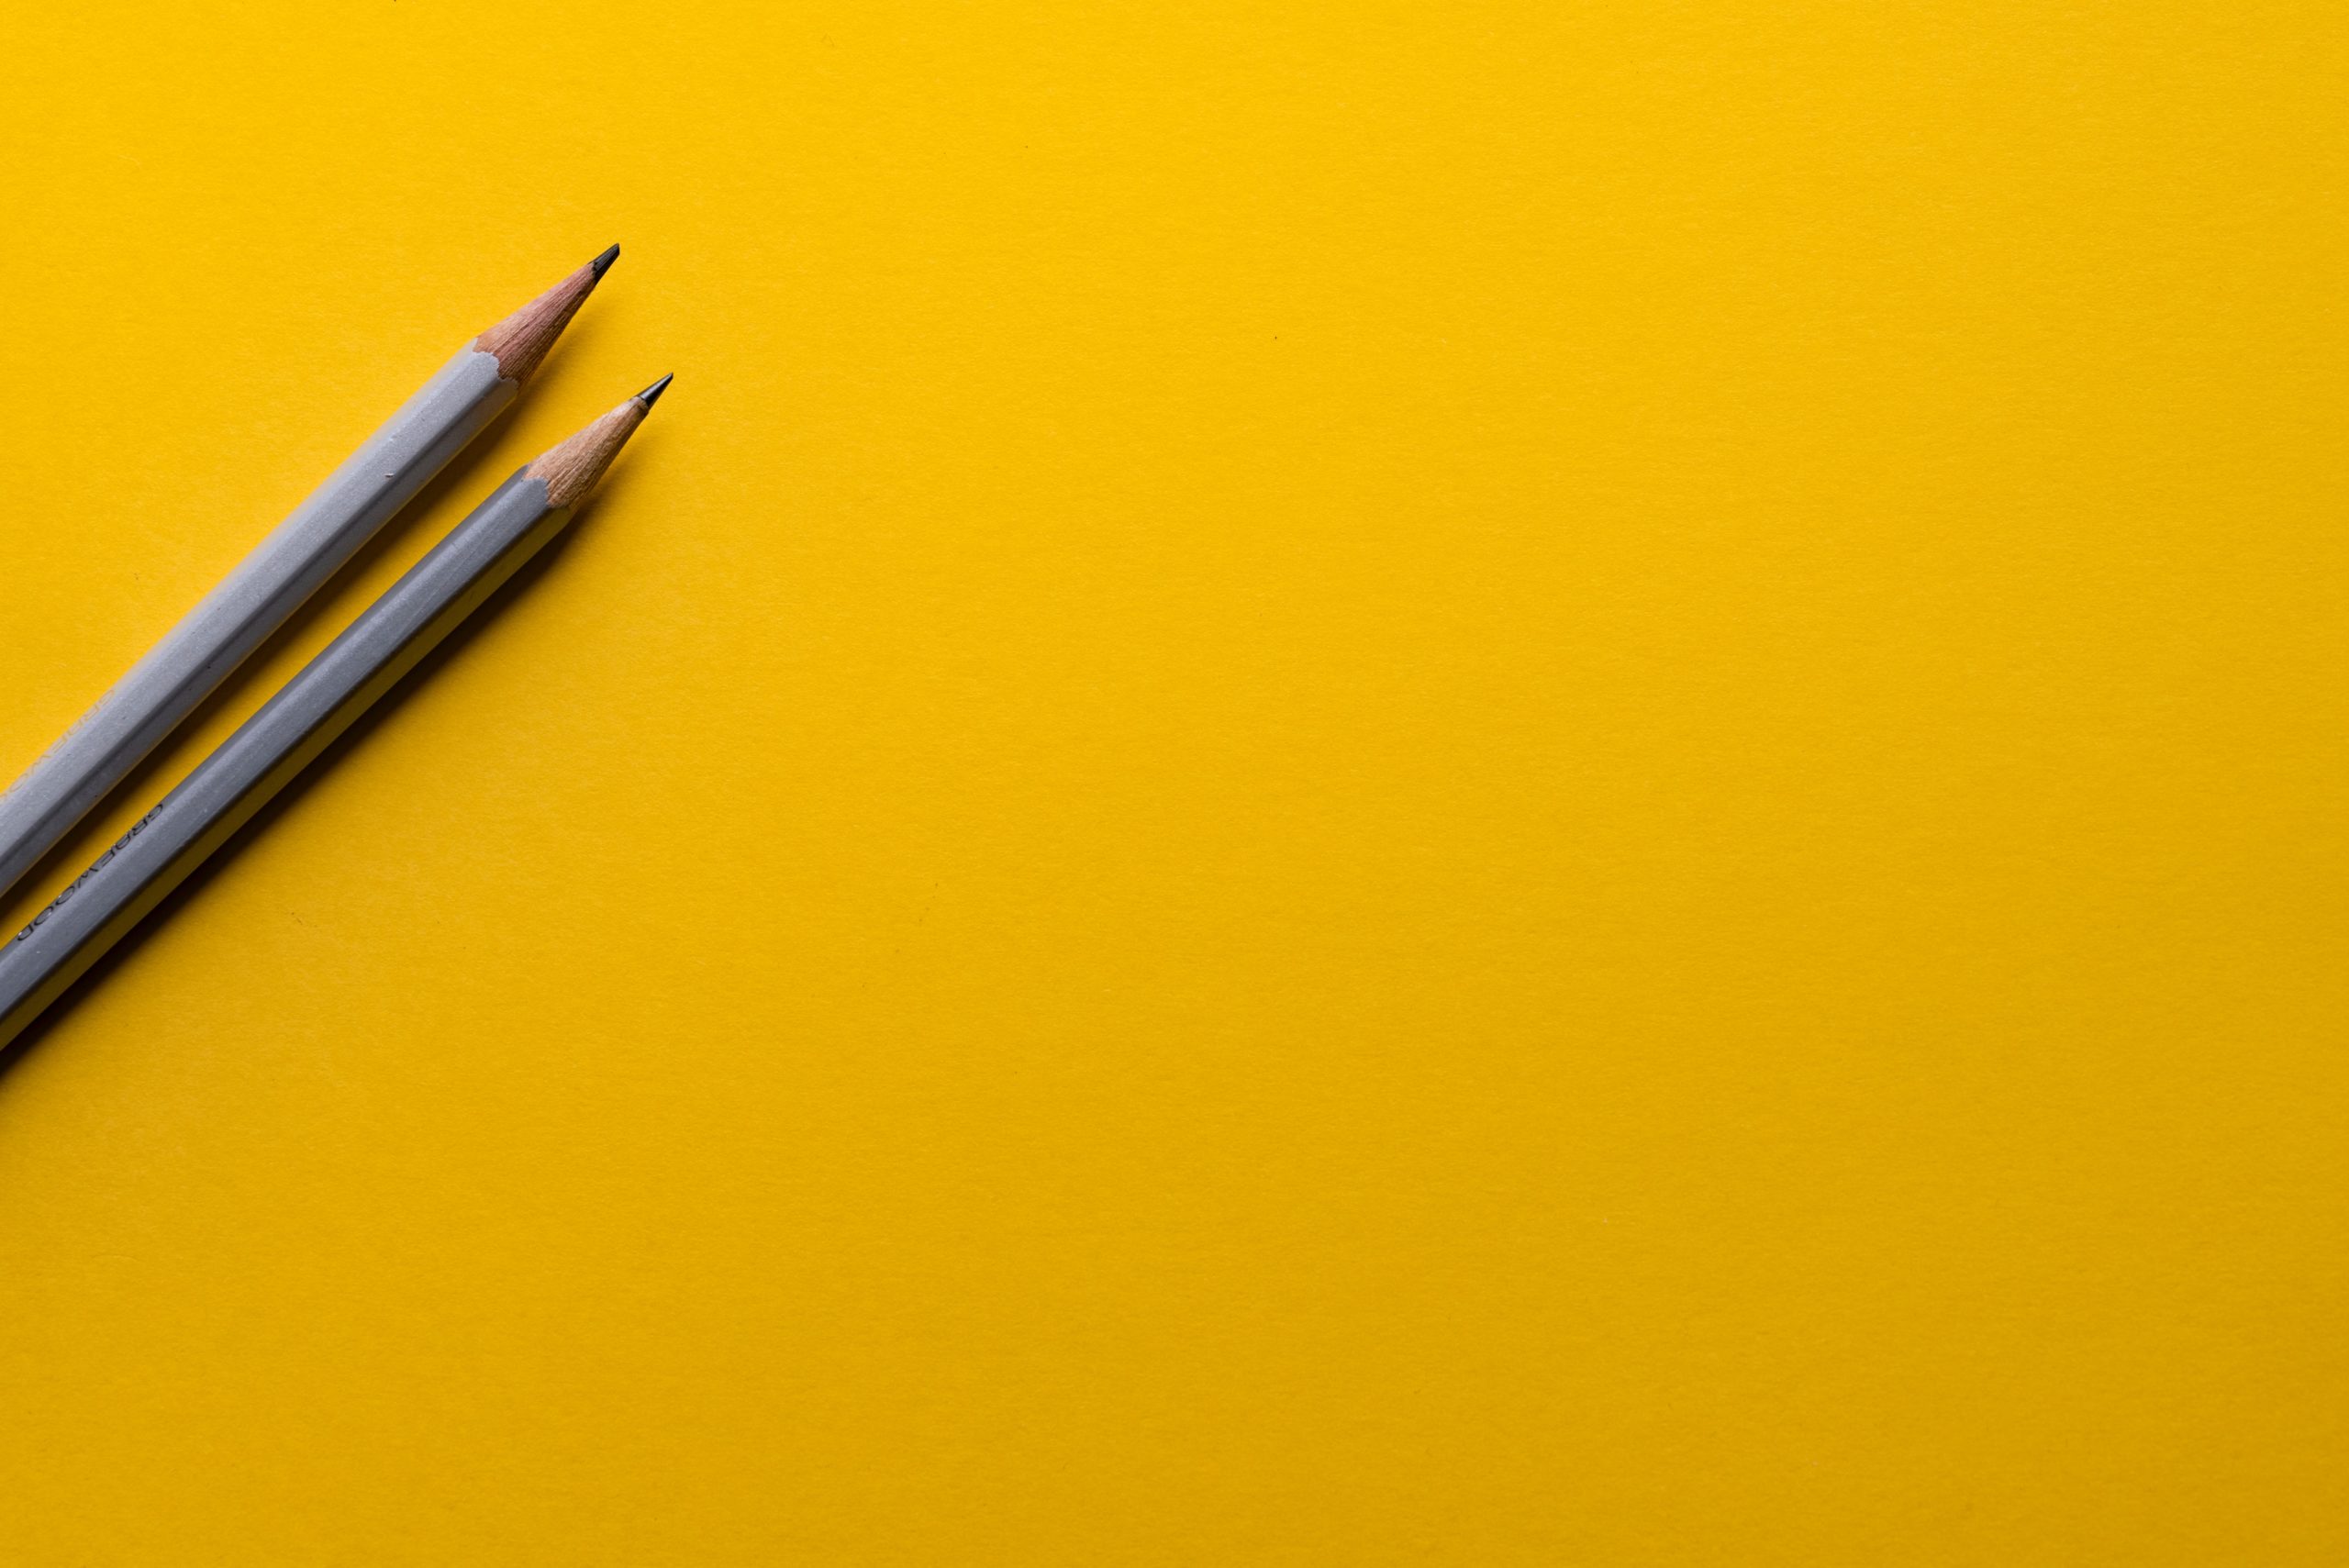 Two pencils against a yellow background